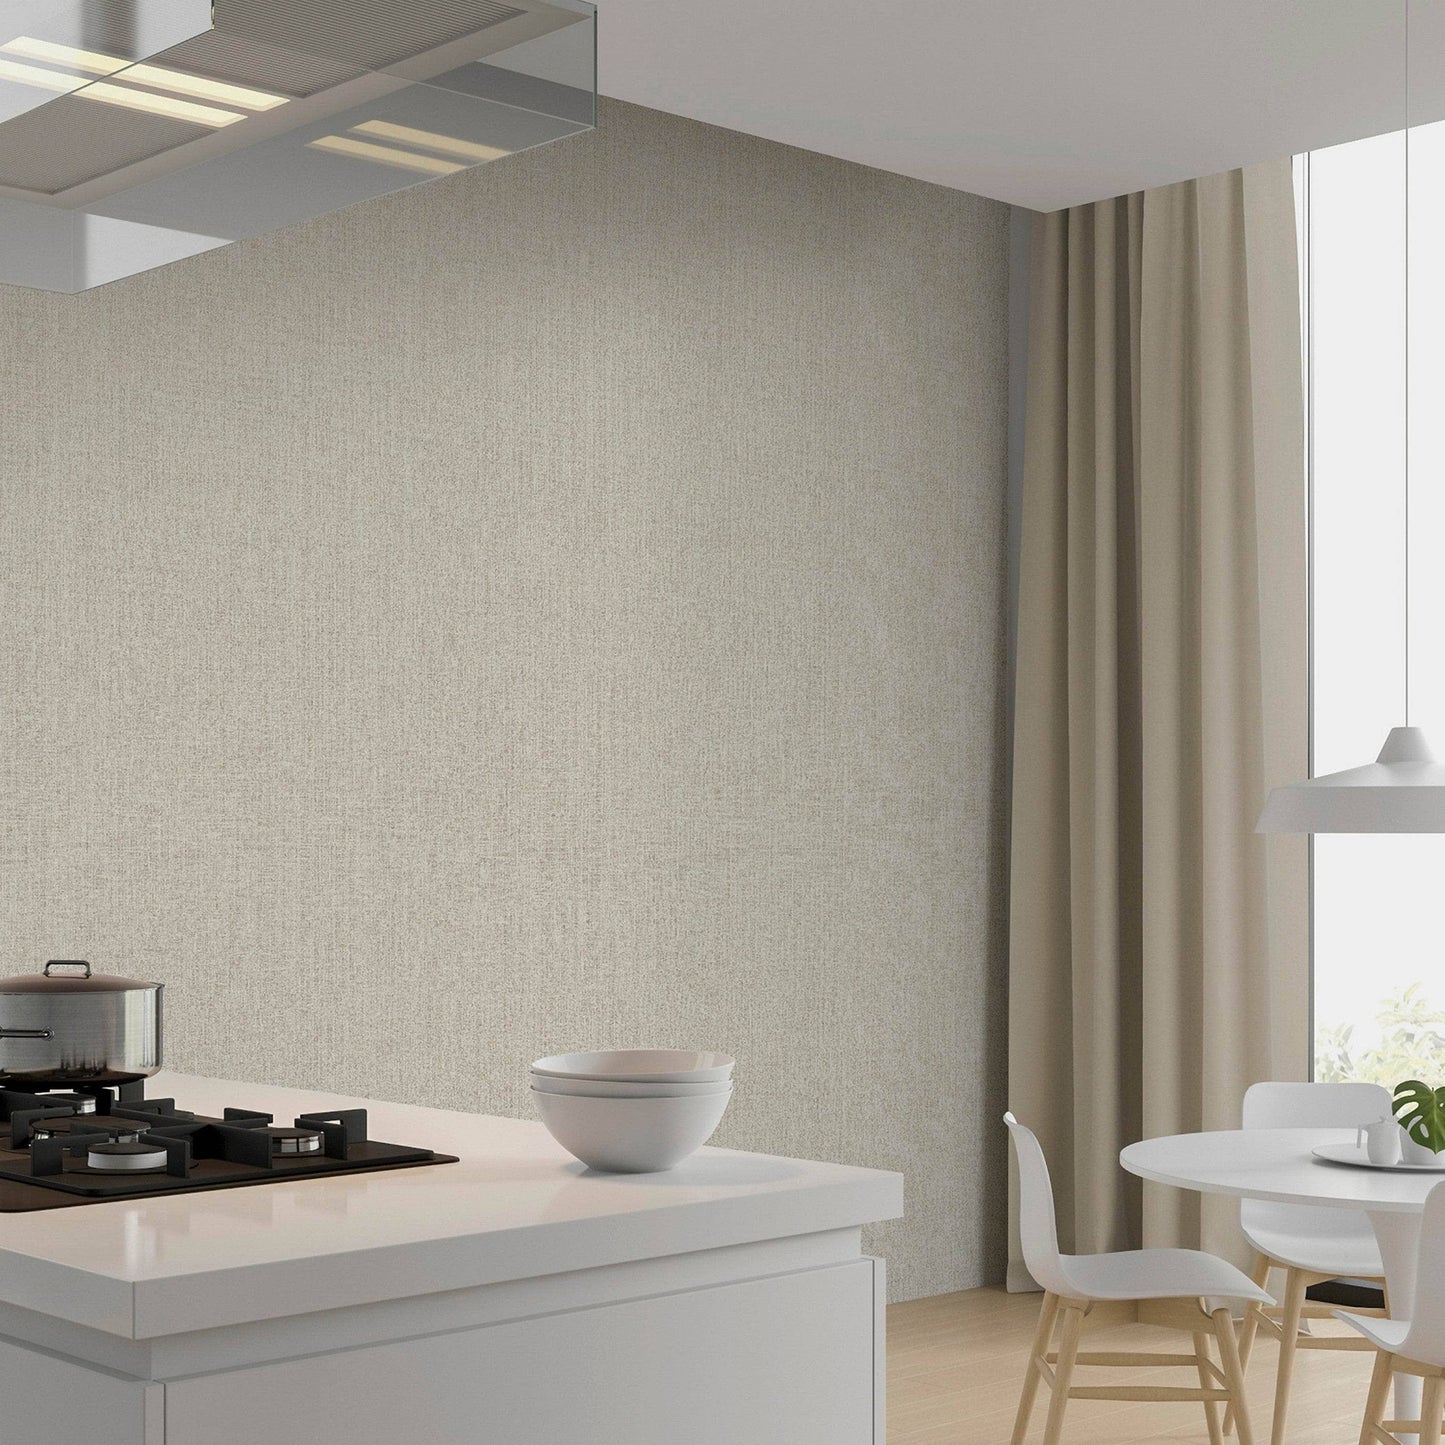 Wallpaper  -  Arthouse Luxe Hessian Taupe Wallpaper - 295402  -  60009444